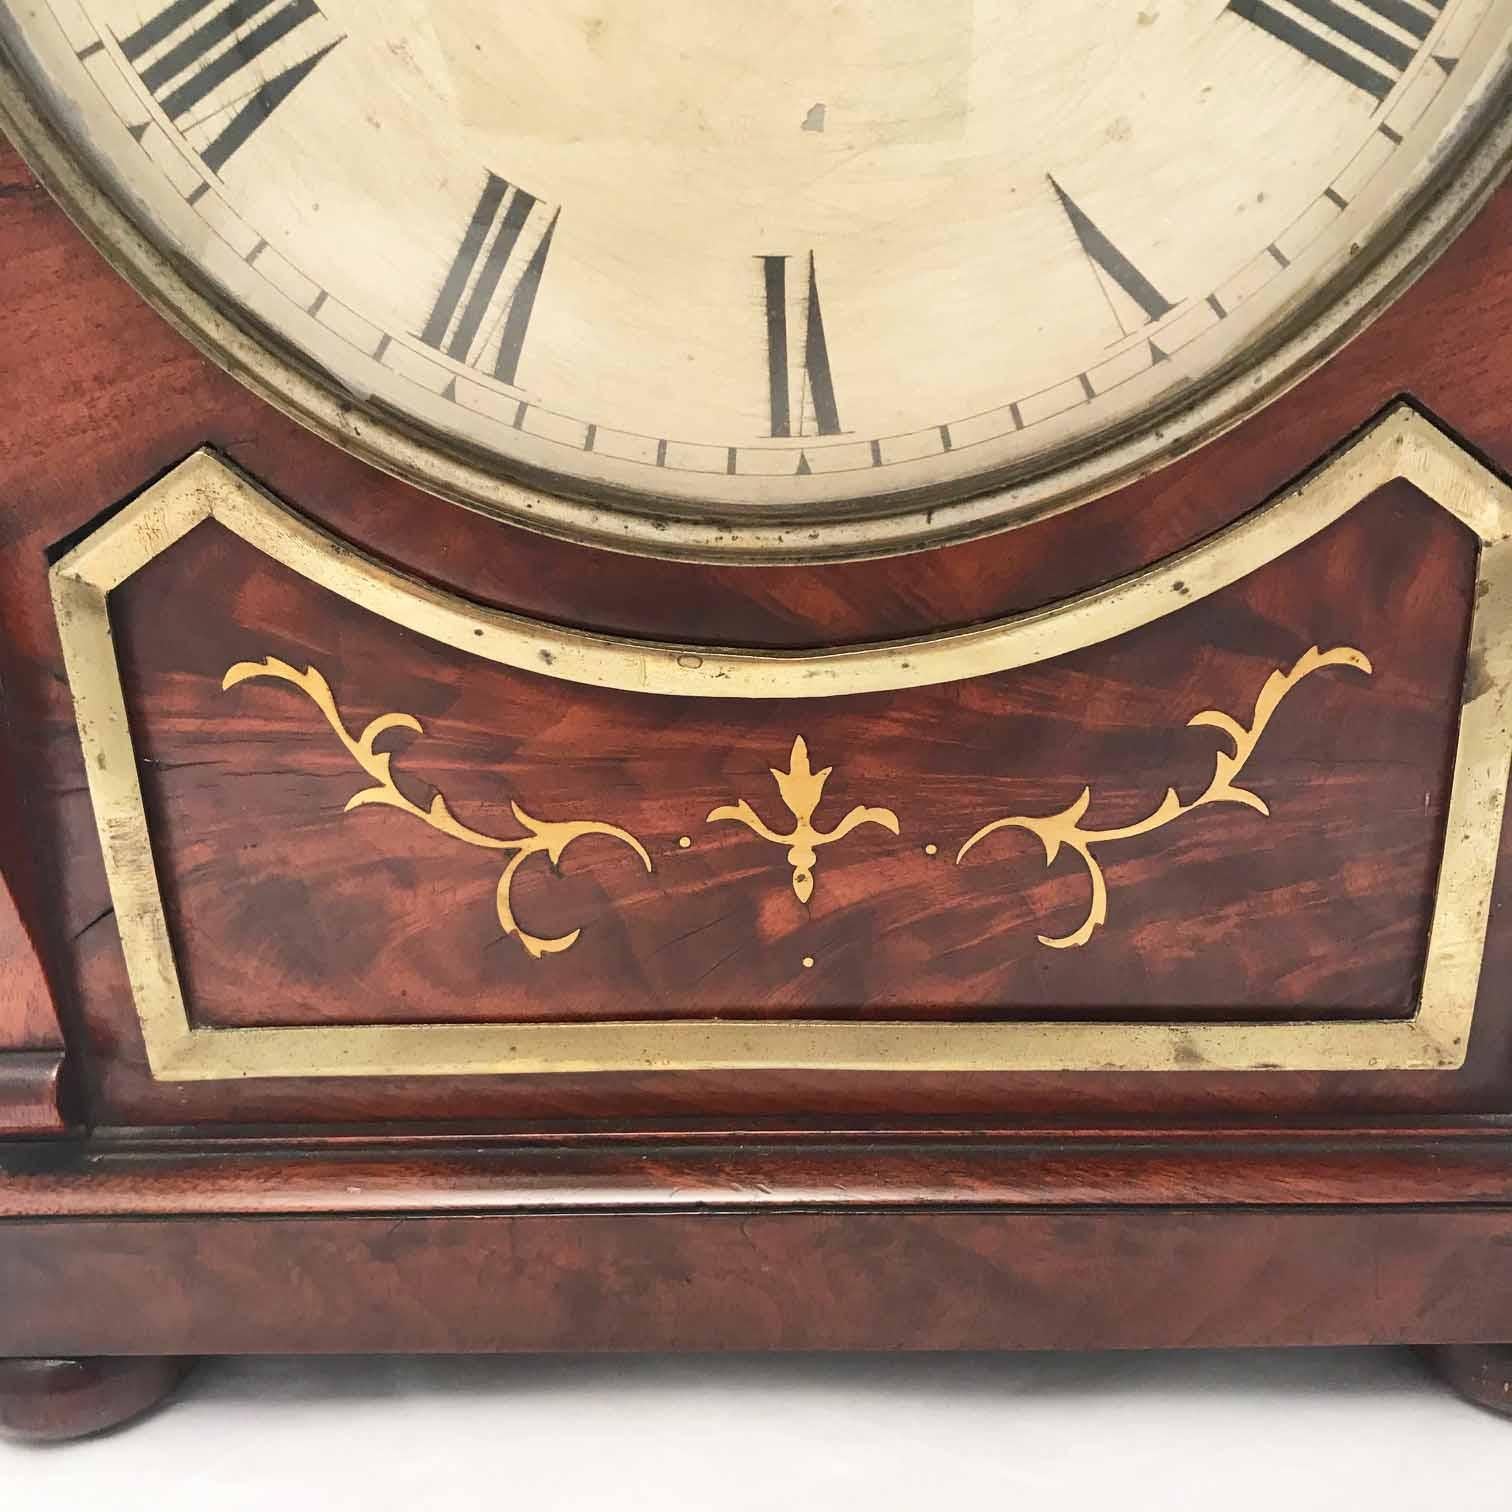 Mid-19th Century British/Canadian Eight Day Mantel Timepiece in Mahogany and Cut-Brass Case